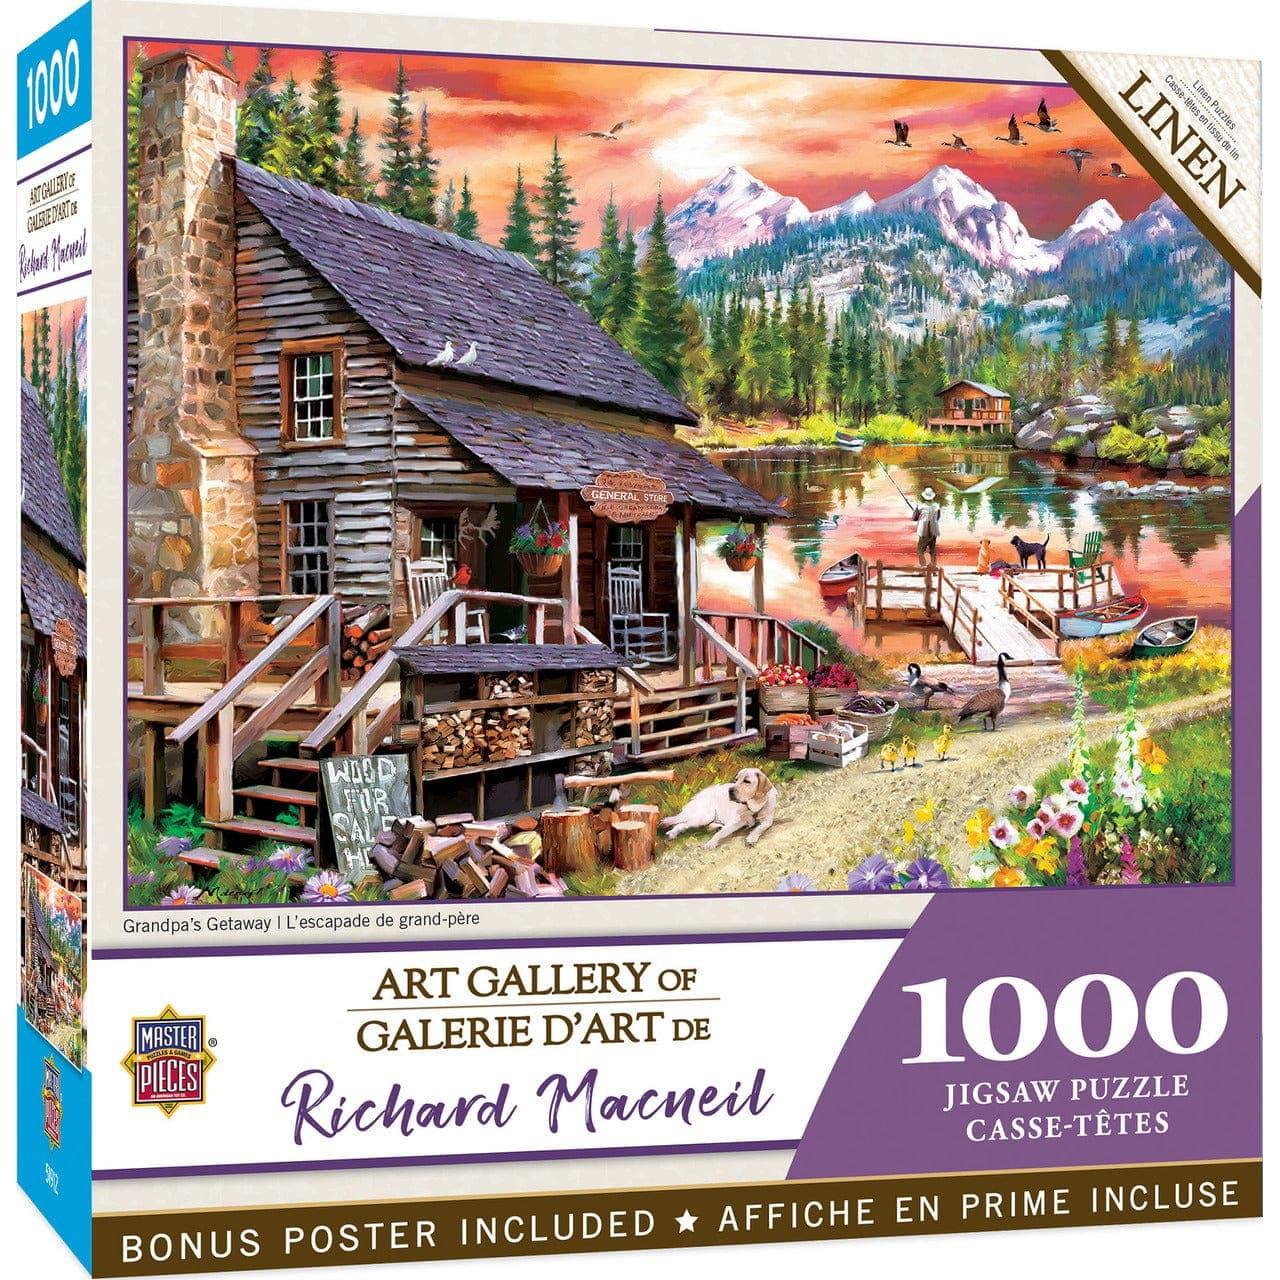 Fantasy Forest, Adult Puzzles, Jigsaw Puzzles, Products